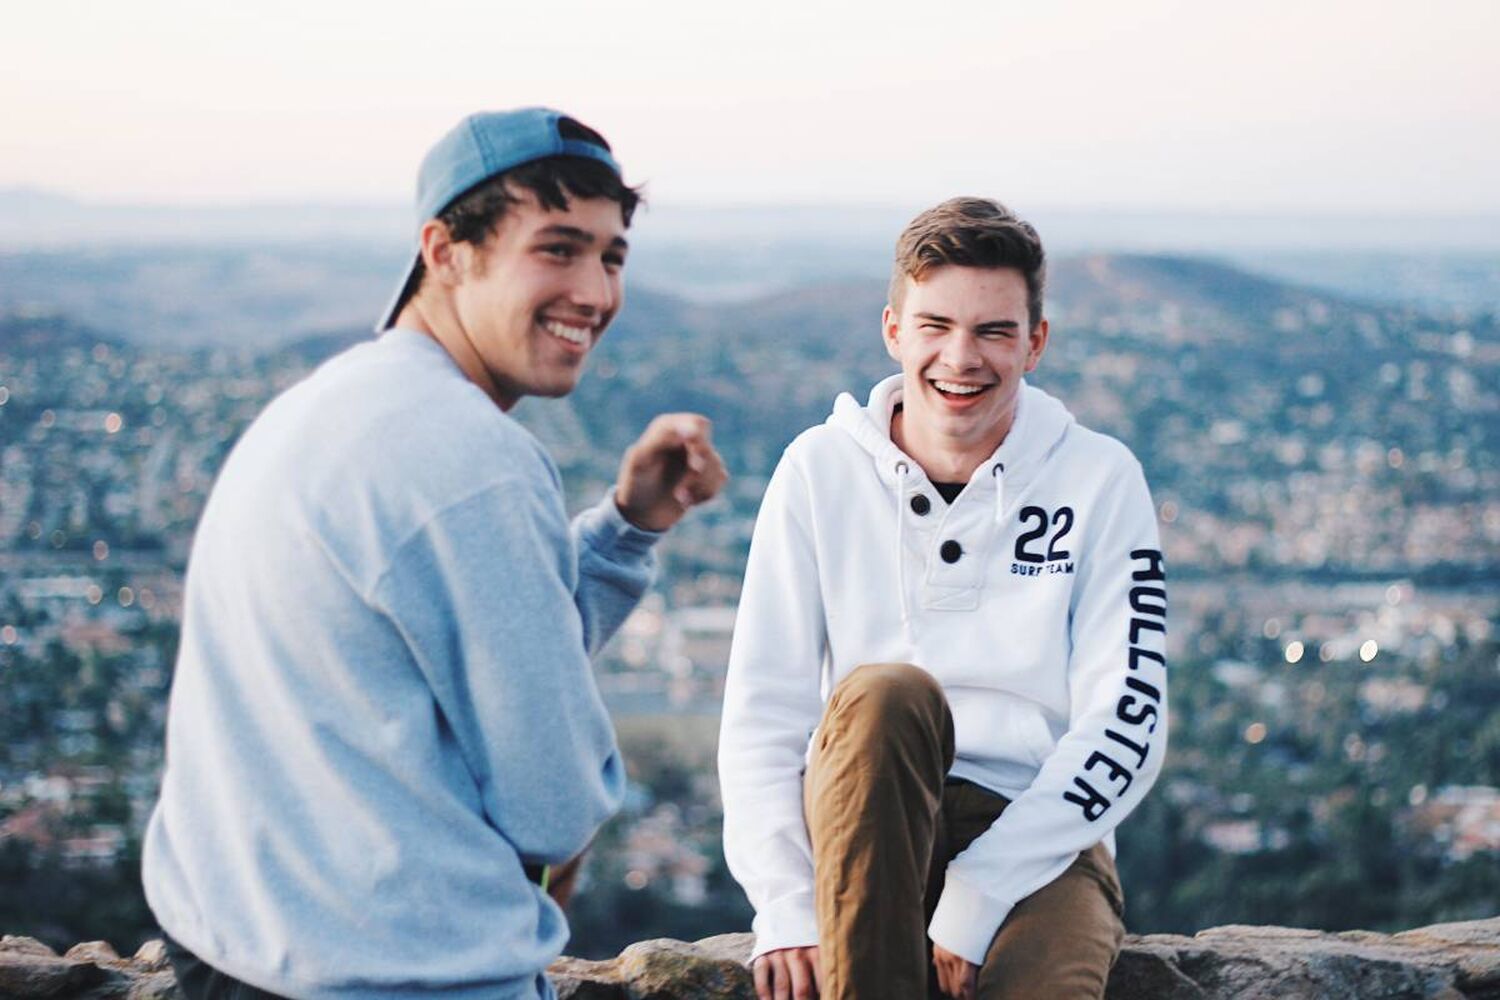 Teenage Boys In Sweatshirts Laughing Sitting In Ledge Above Town In Background